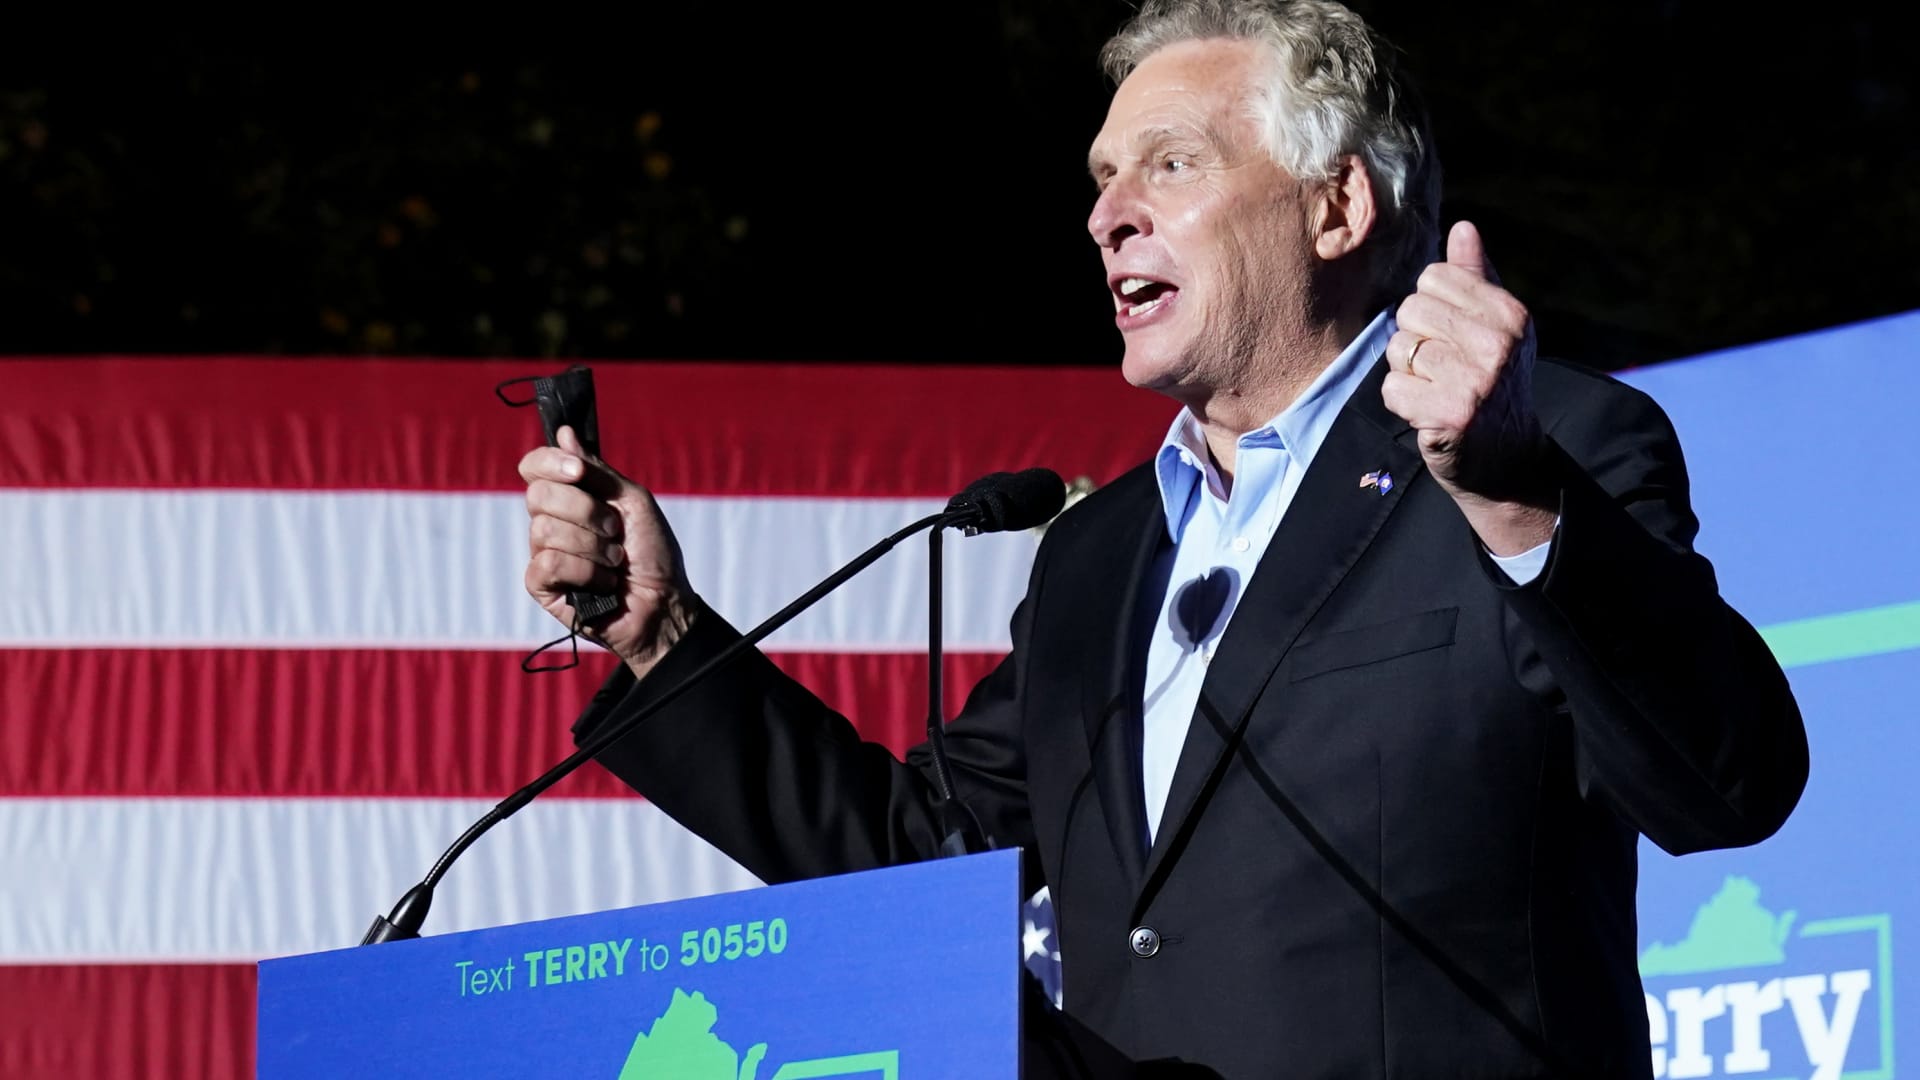 Candidate for Governor of Virginia Terry McAuliffe speaks during his campaign rally in Dumfries, Virginia October 21, 2021.